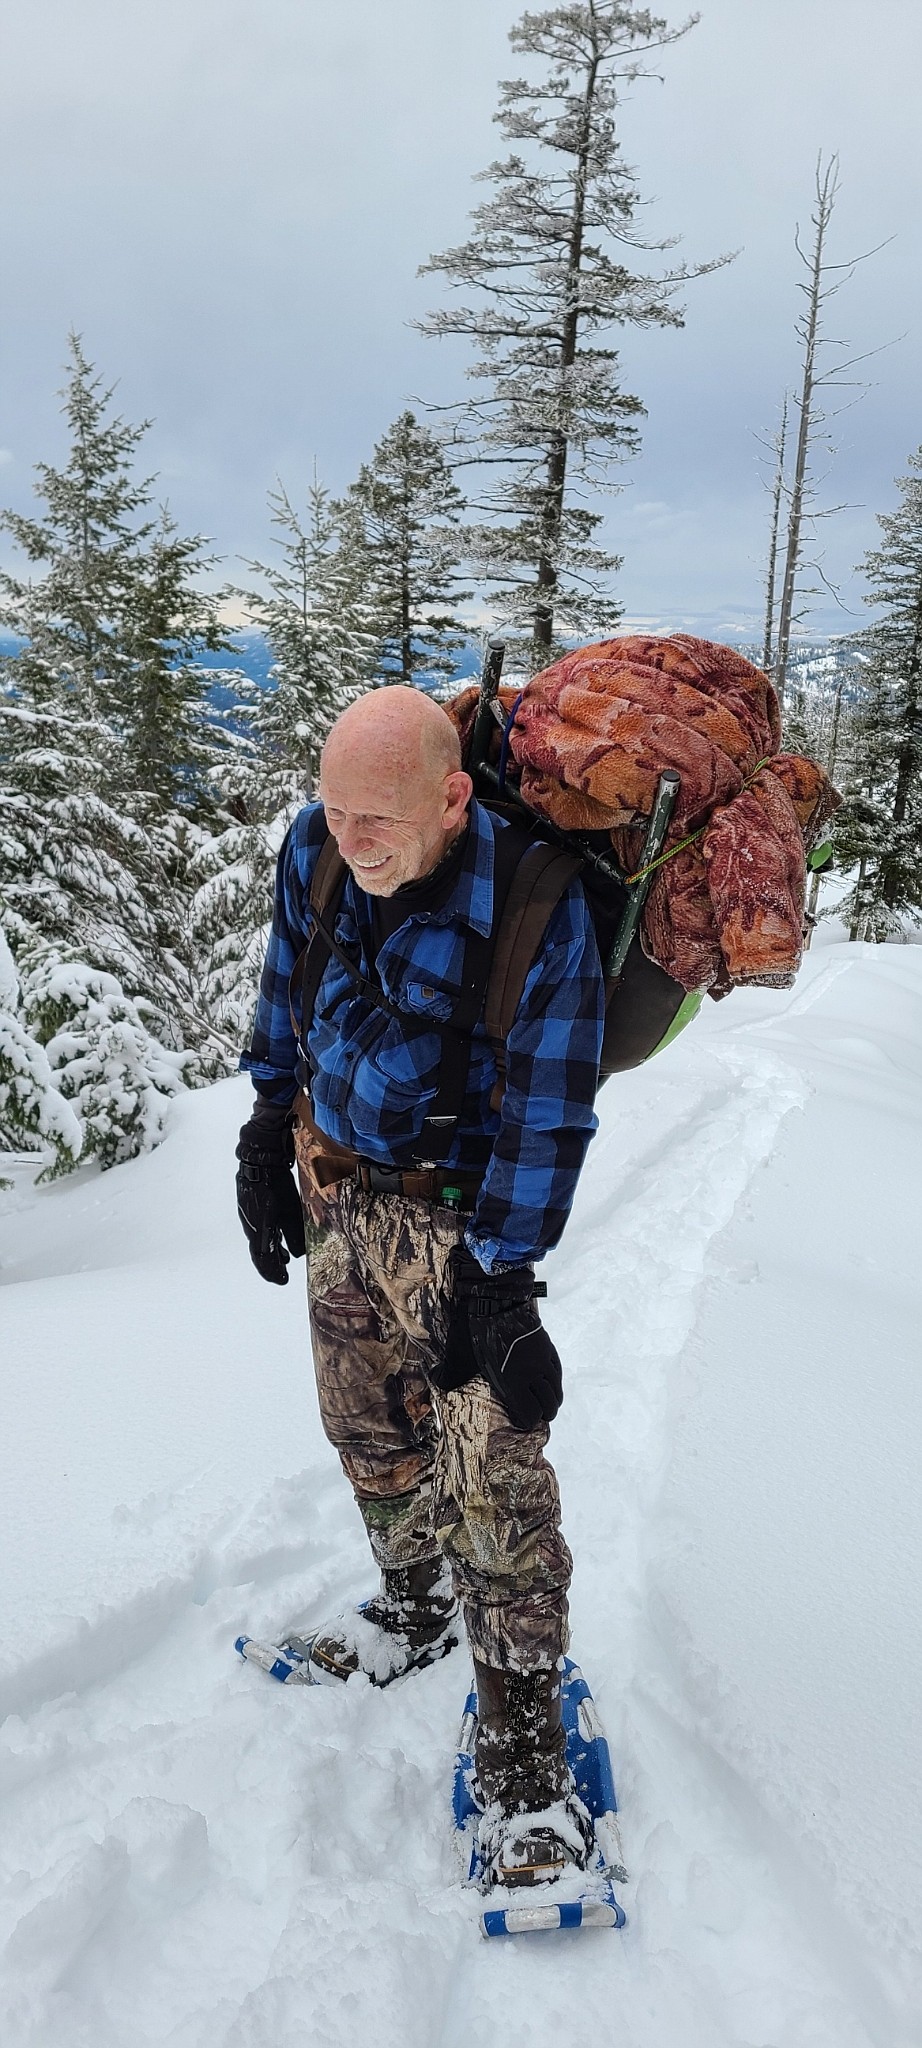 Pat Flanigan, 79, stops for a quick break during the 4.5-mile snowshoe hike to Joe Avery's cabin.